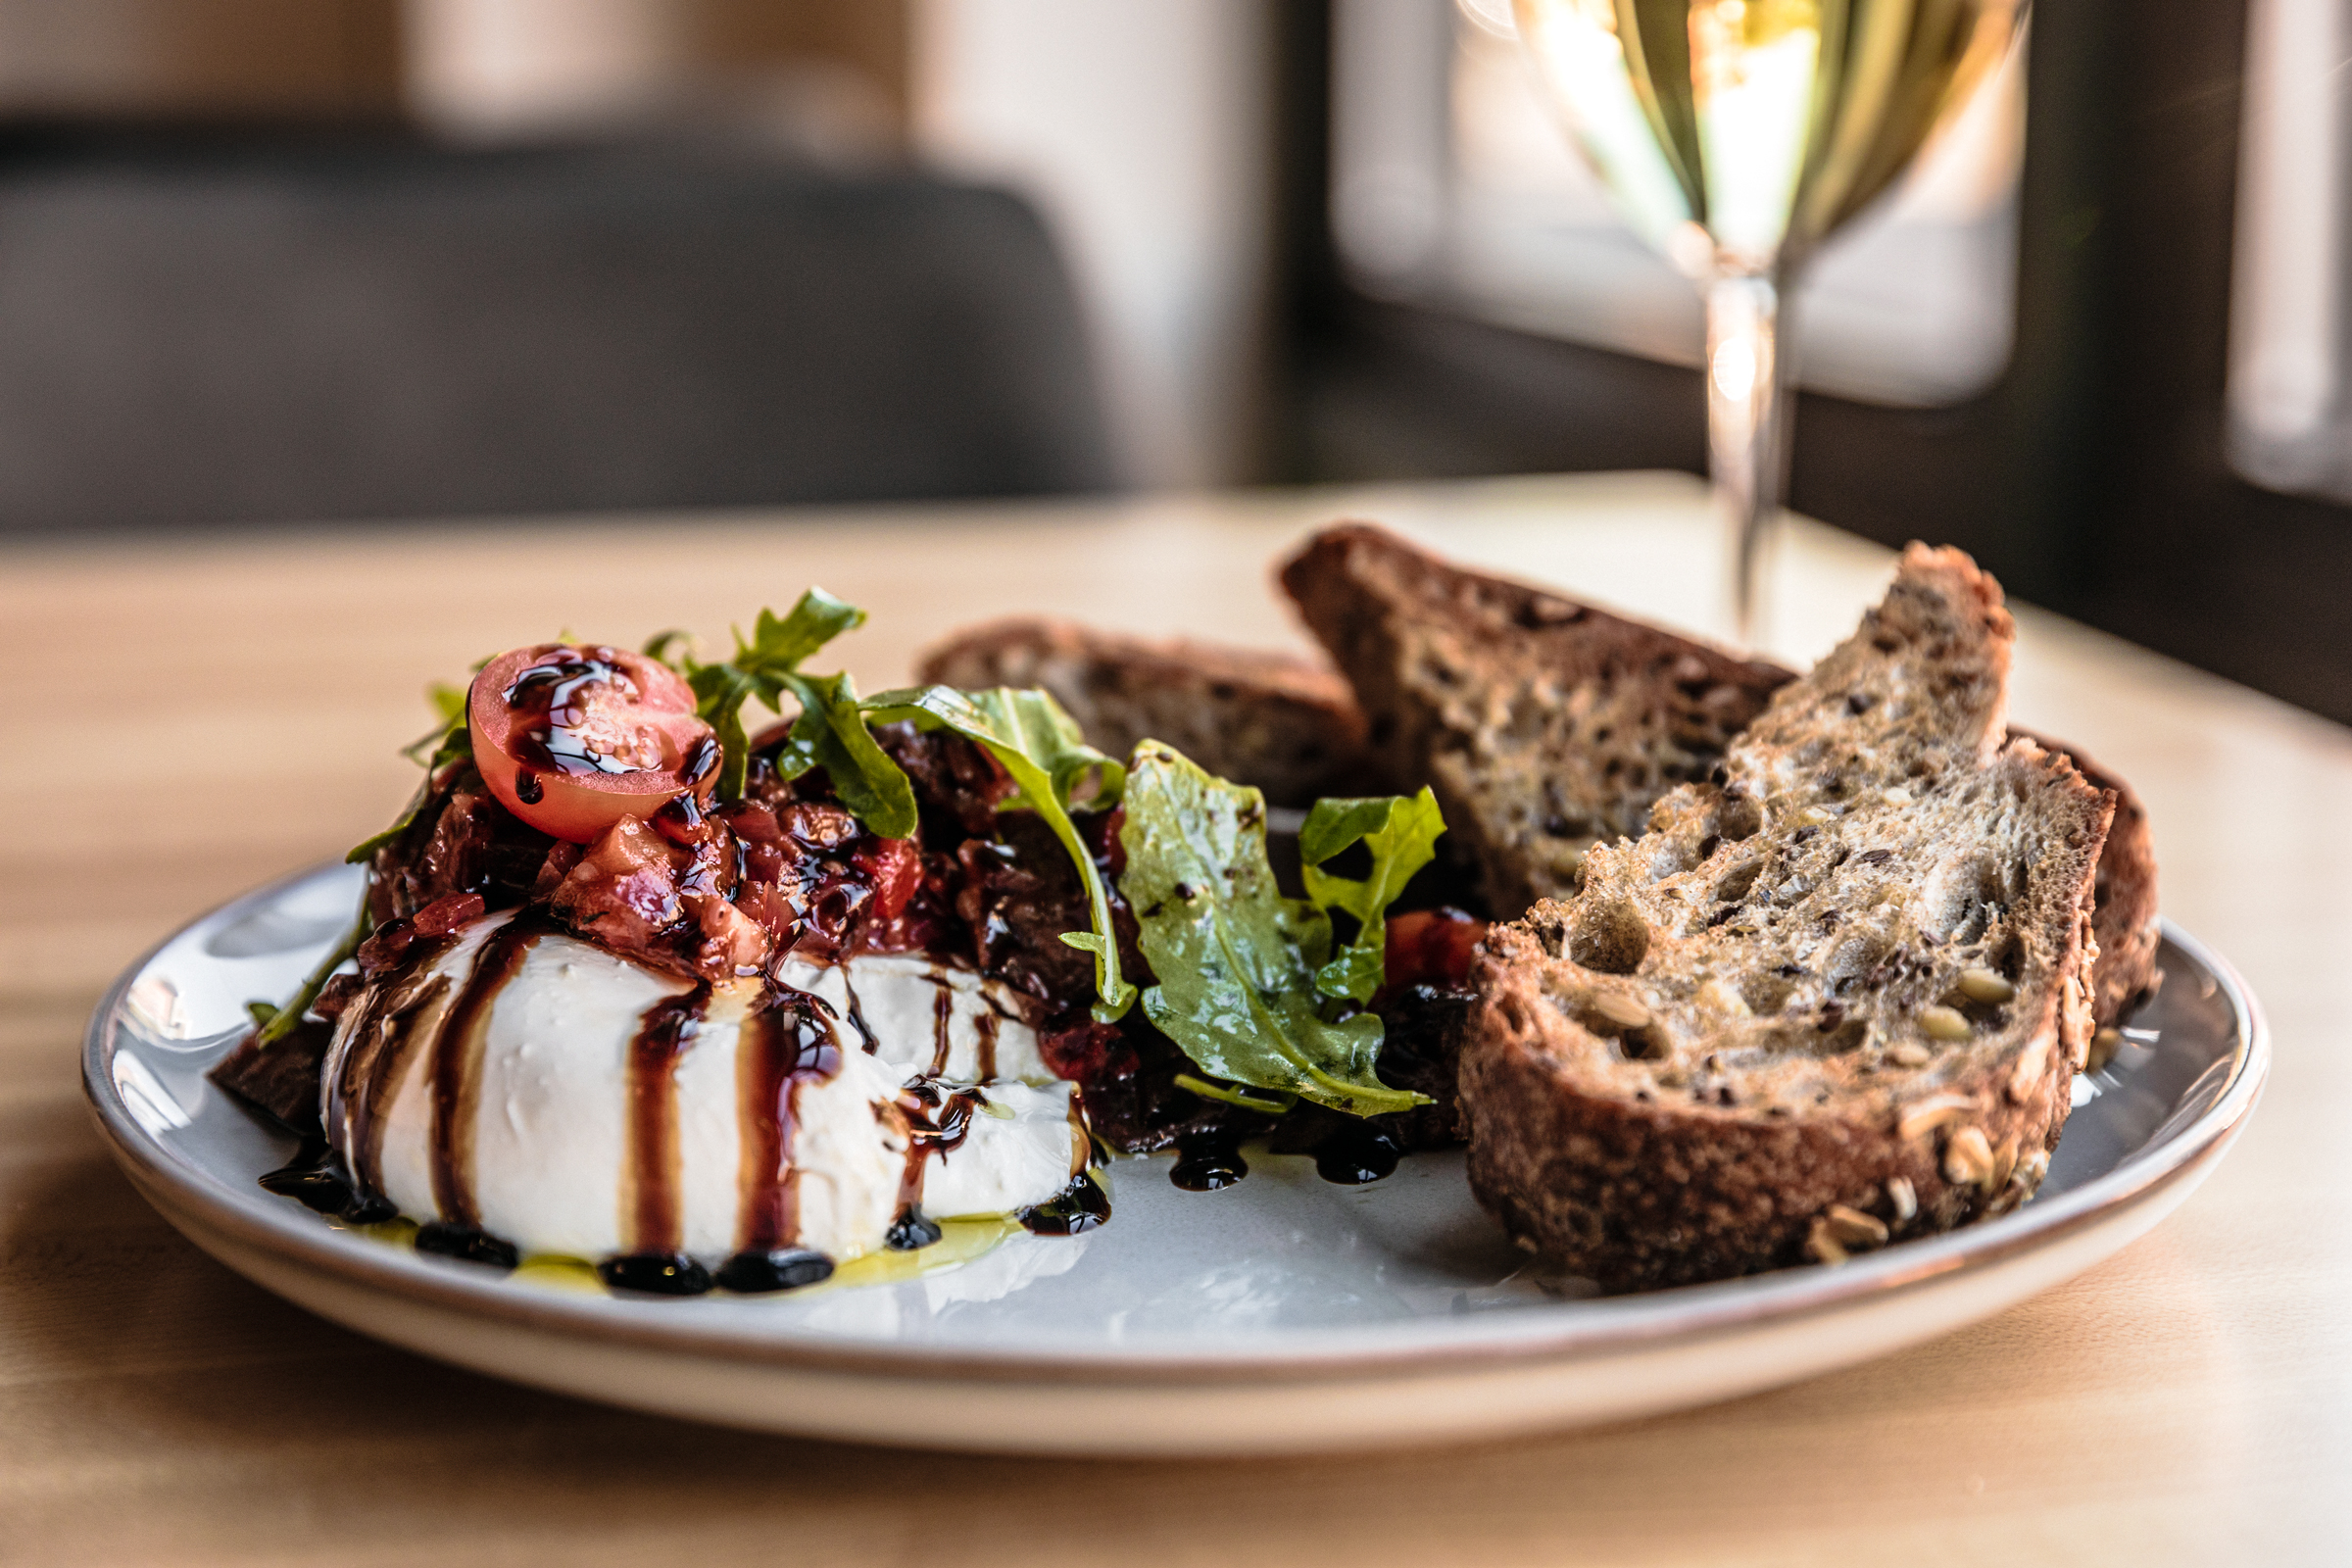 A plate of burrata and toast.